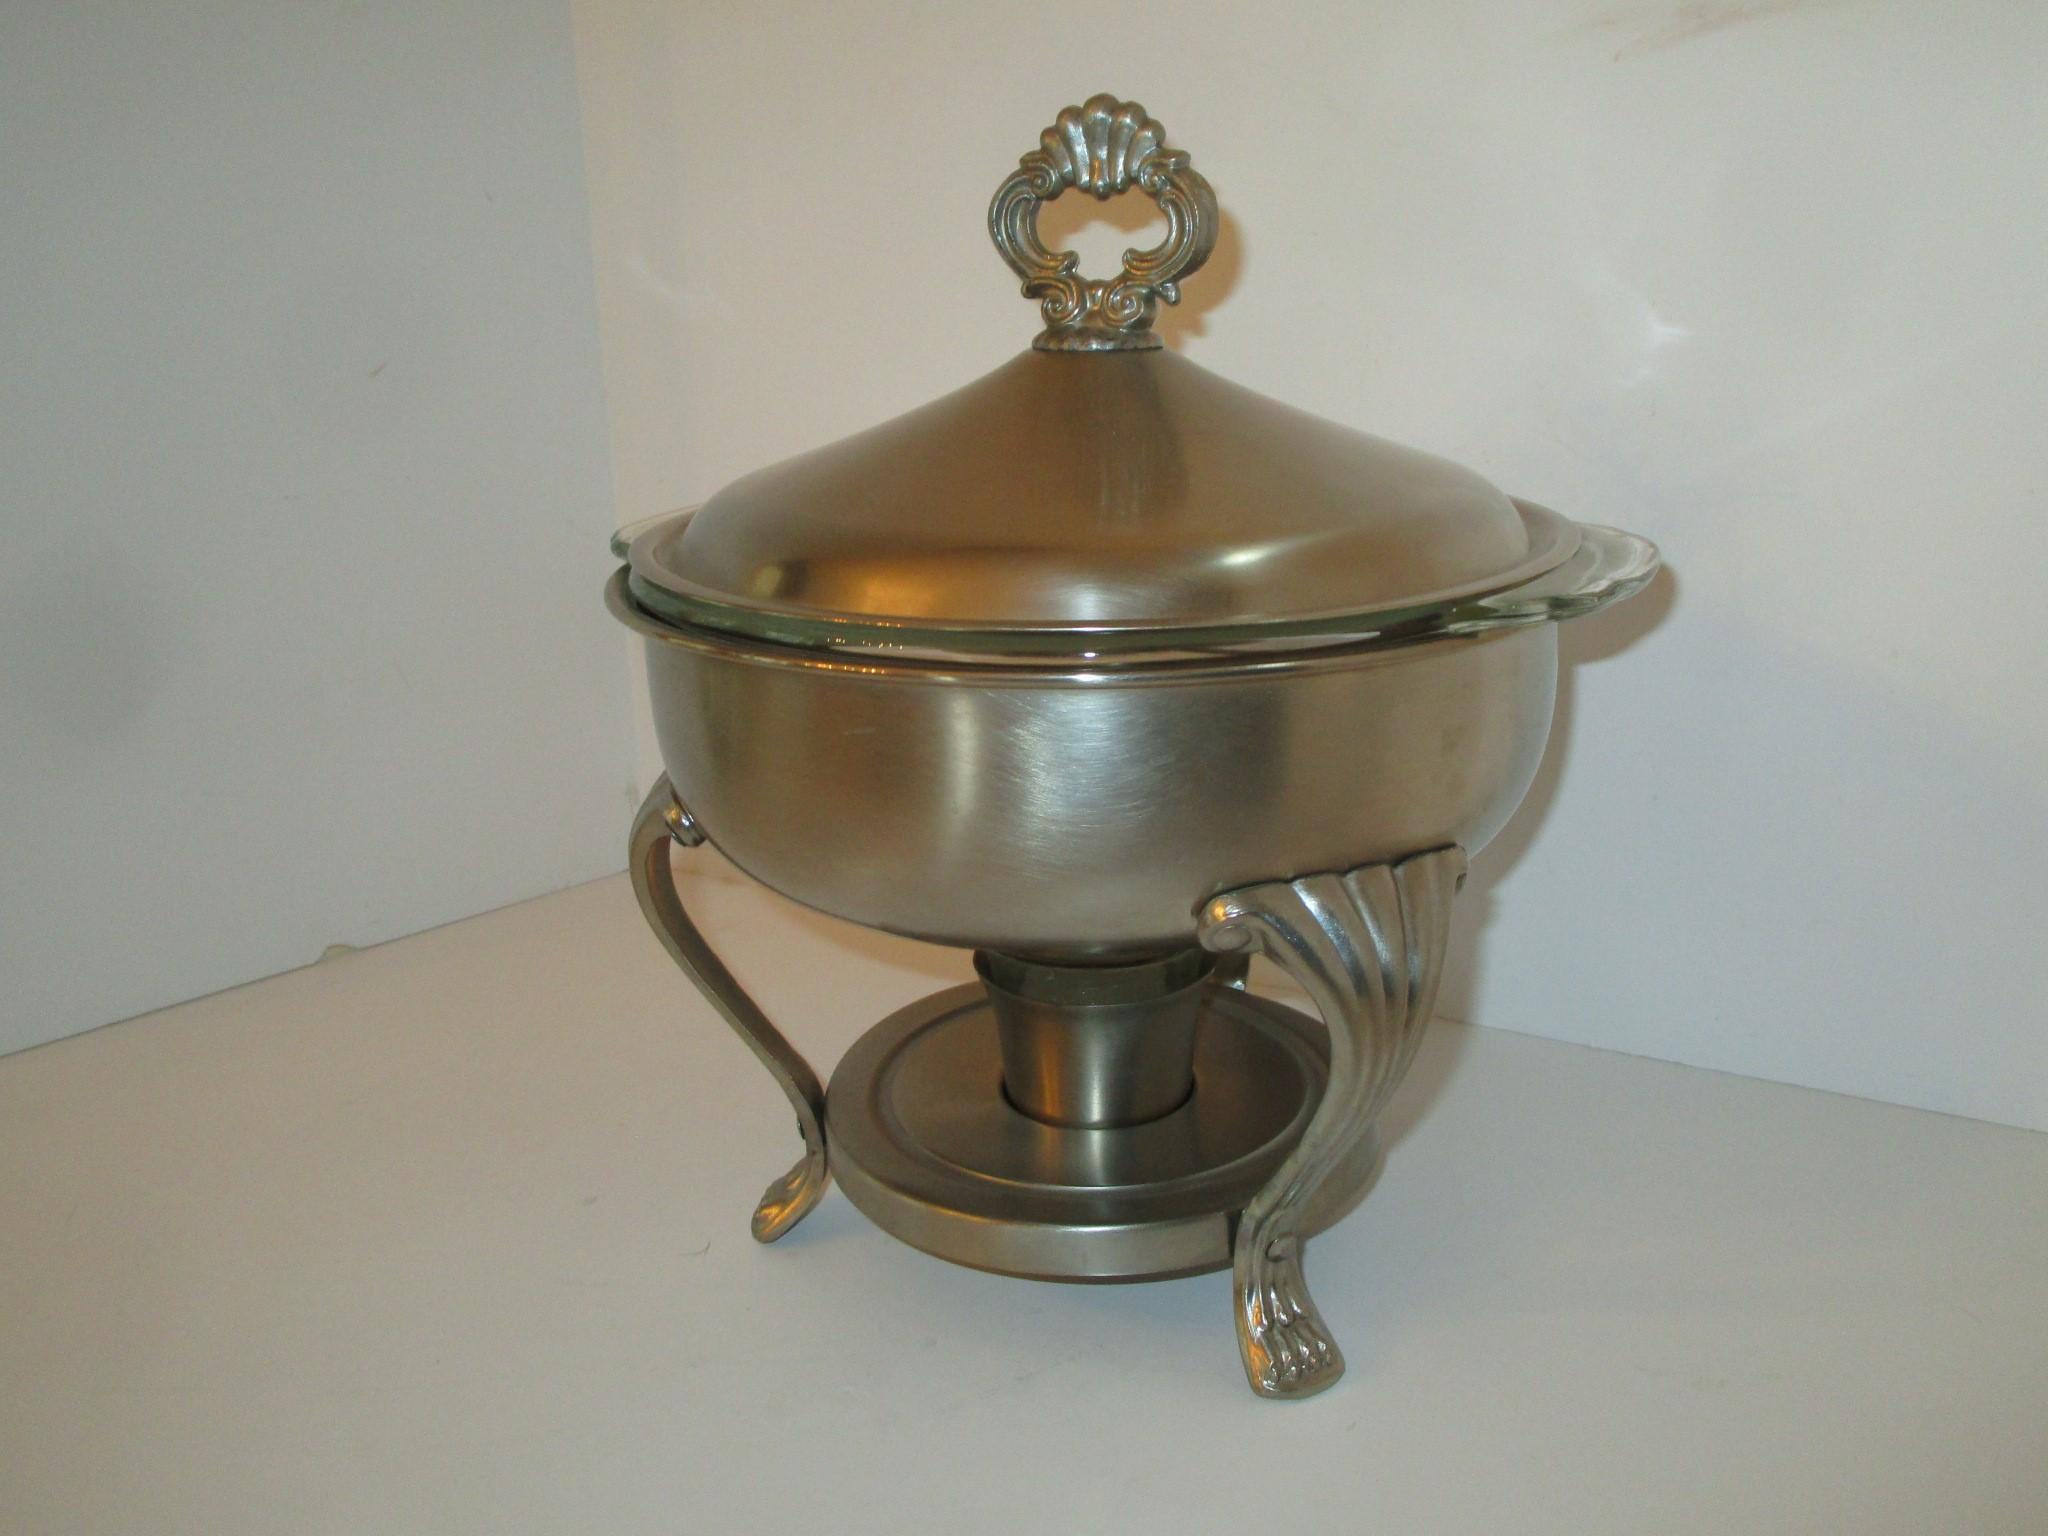 Wm Rodgers Brushed Pewter Chafing Dish w/ Lid & Warmer & Pyrex Dish Insert - 11" T X 10.5" R